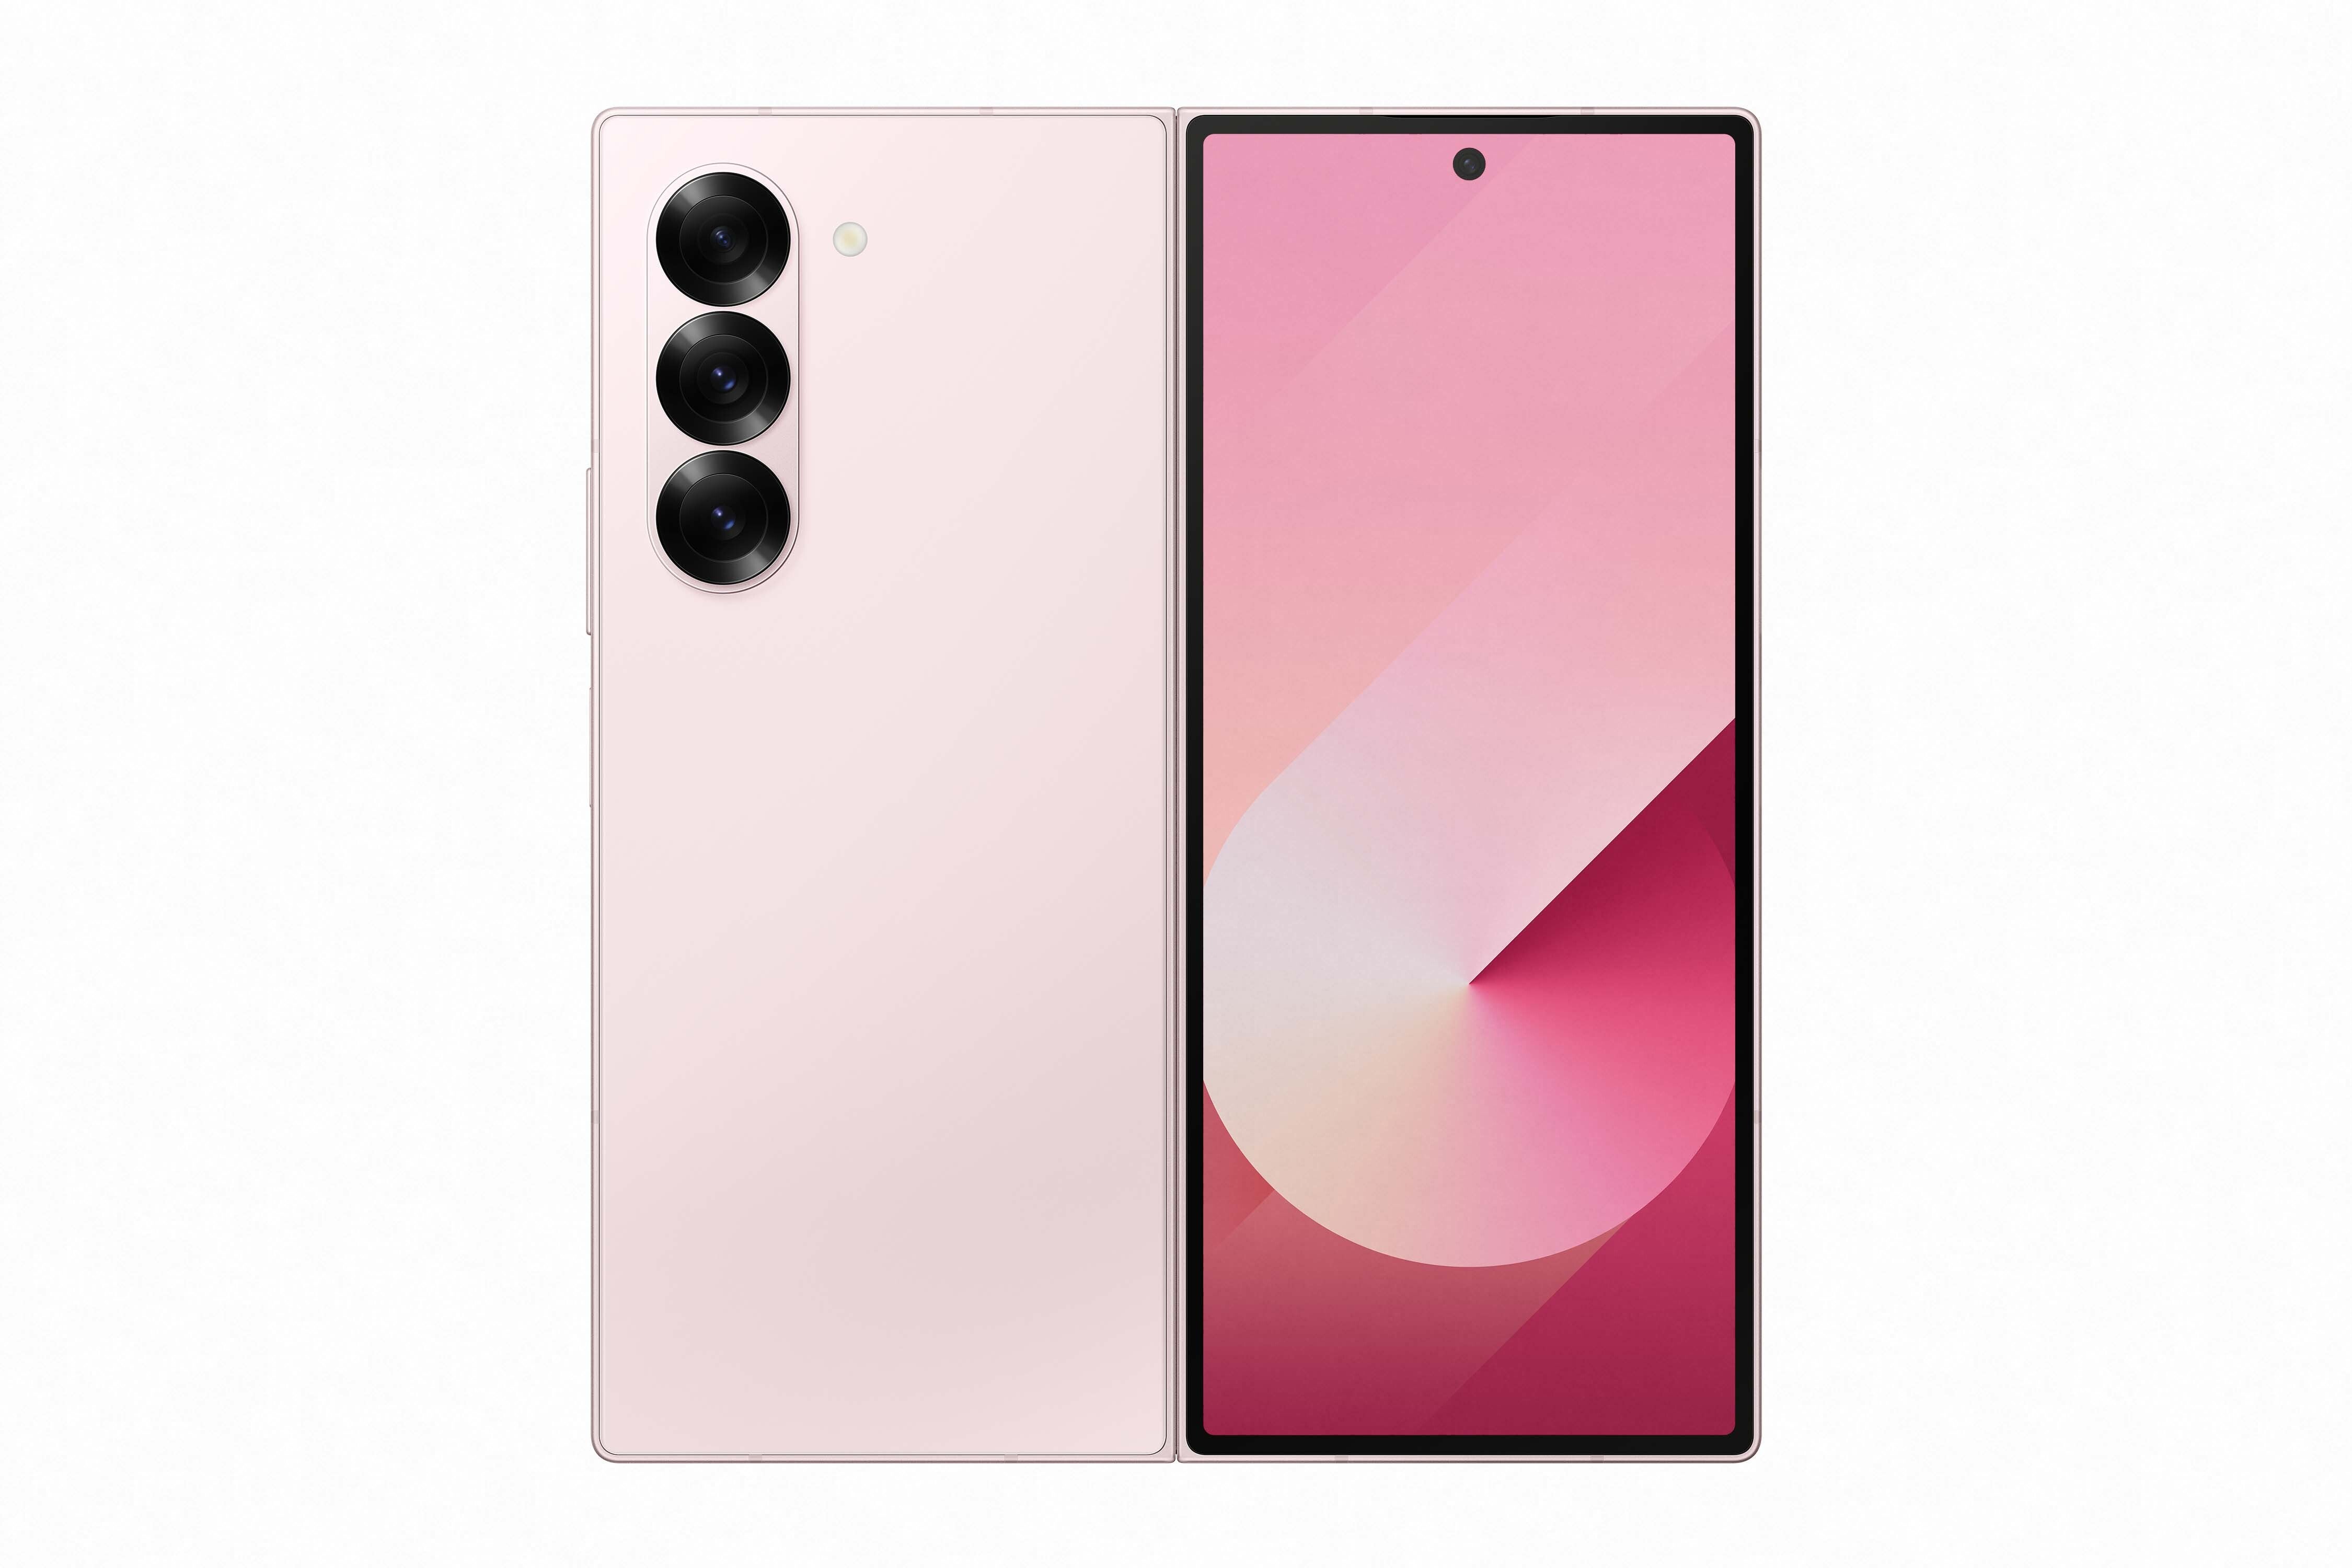 Z Fold 6 in Pink. | Image Source - Samsung - Galaxy Z Fold 6 colors: all the official hues